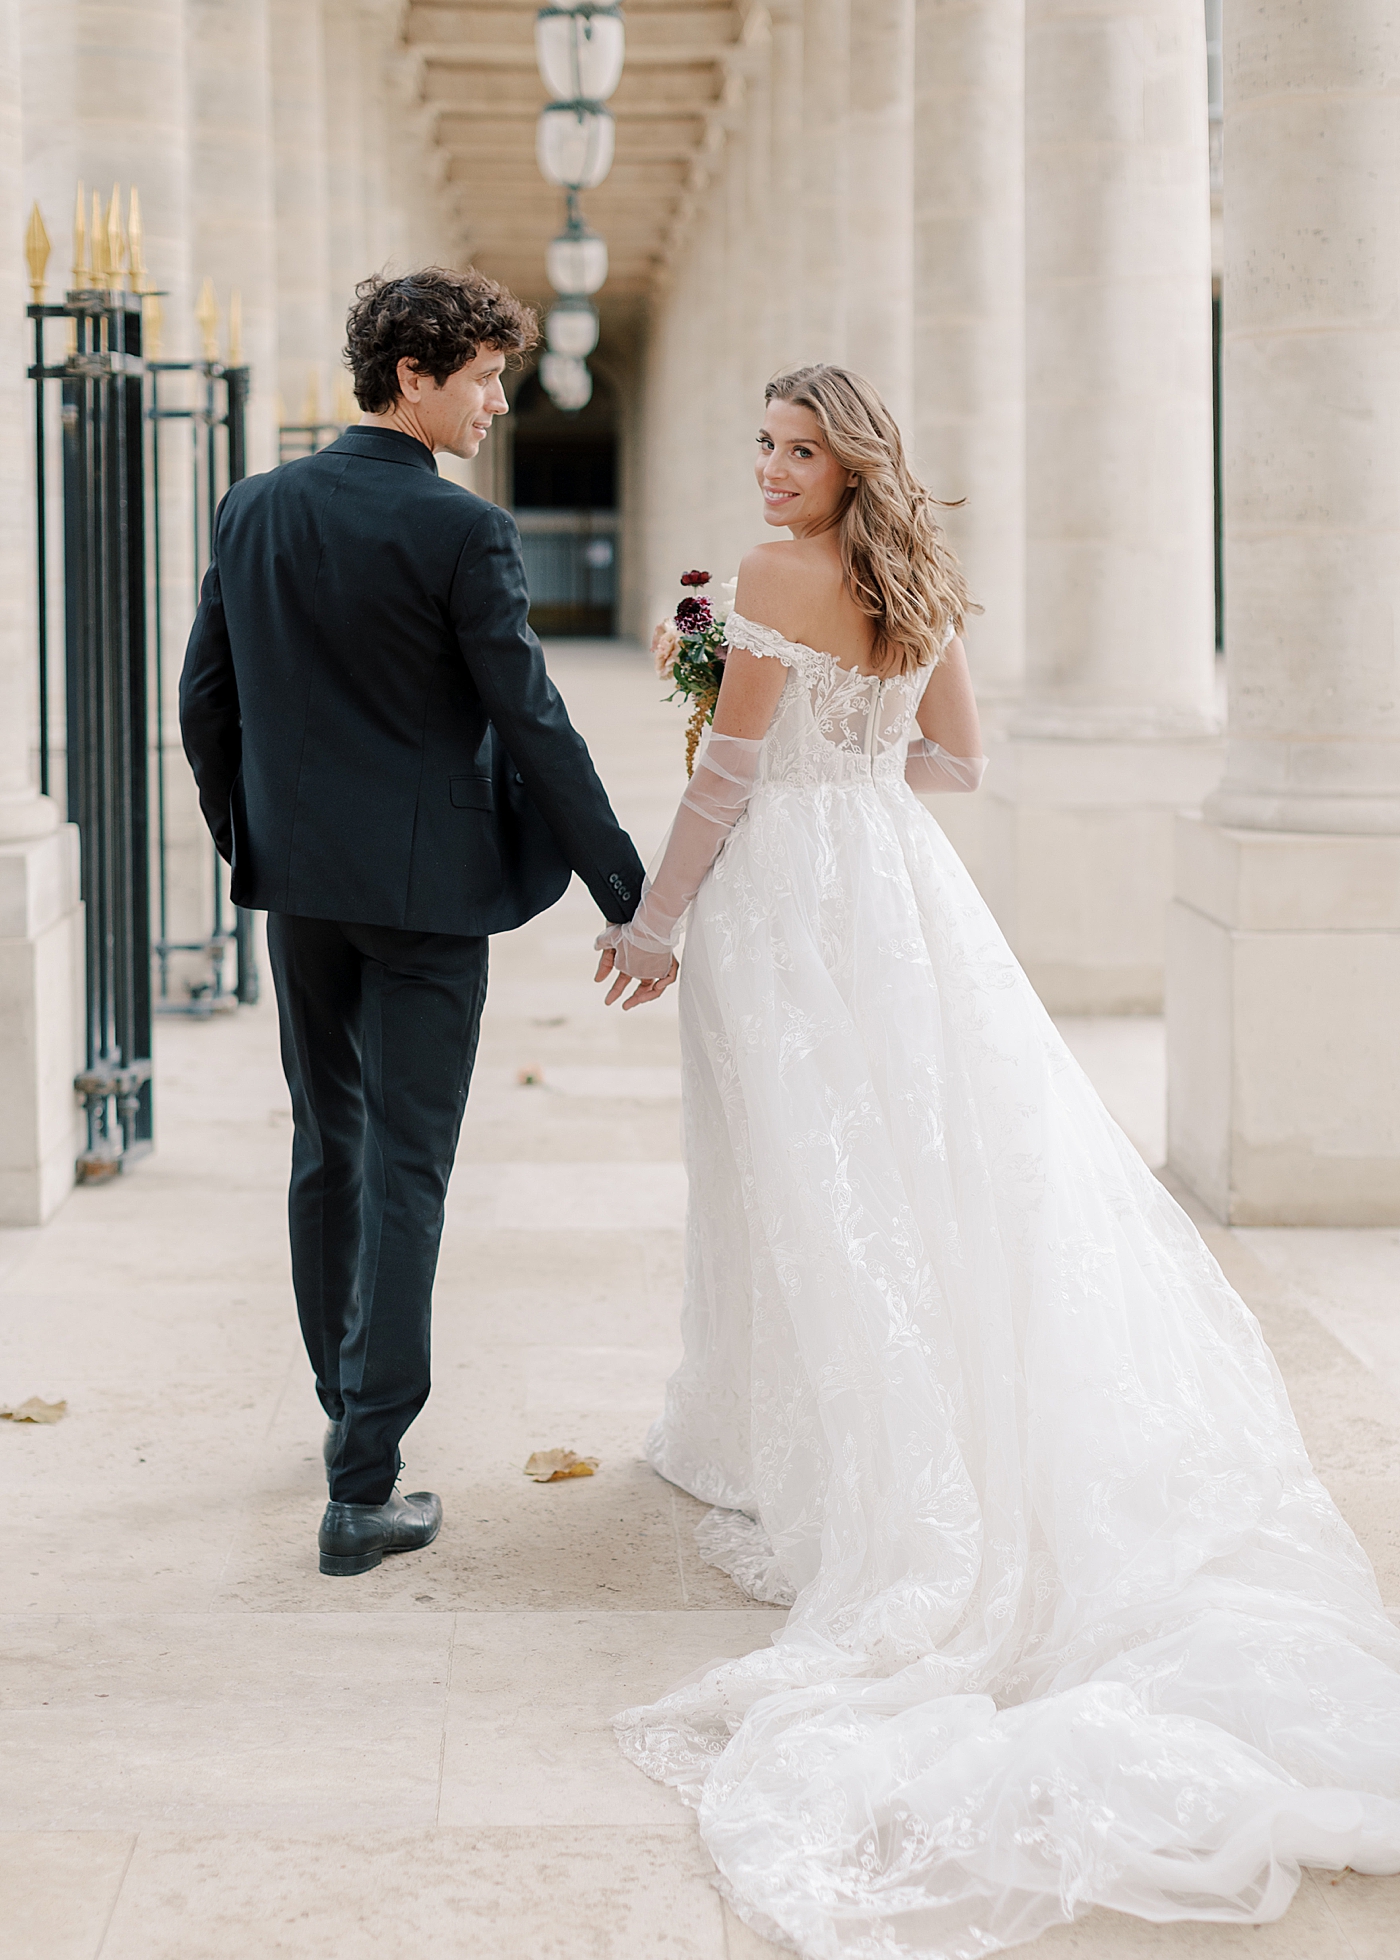 Image of a bride and groom holding hands and walking away in an outdoor, sunlit, concrete corridor| Image by Hope Helmuth Photography